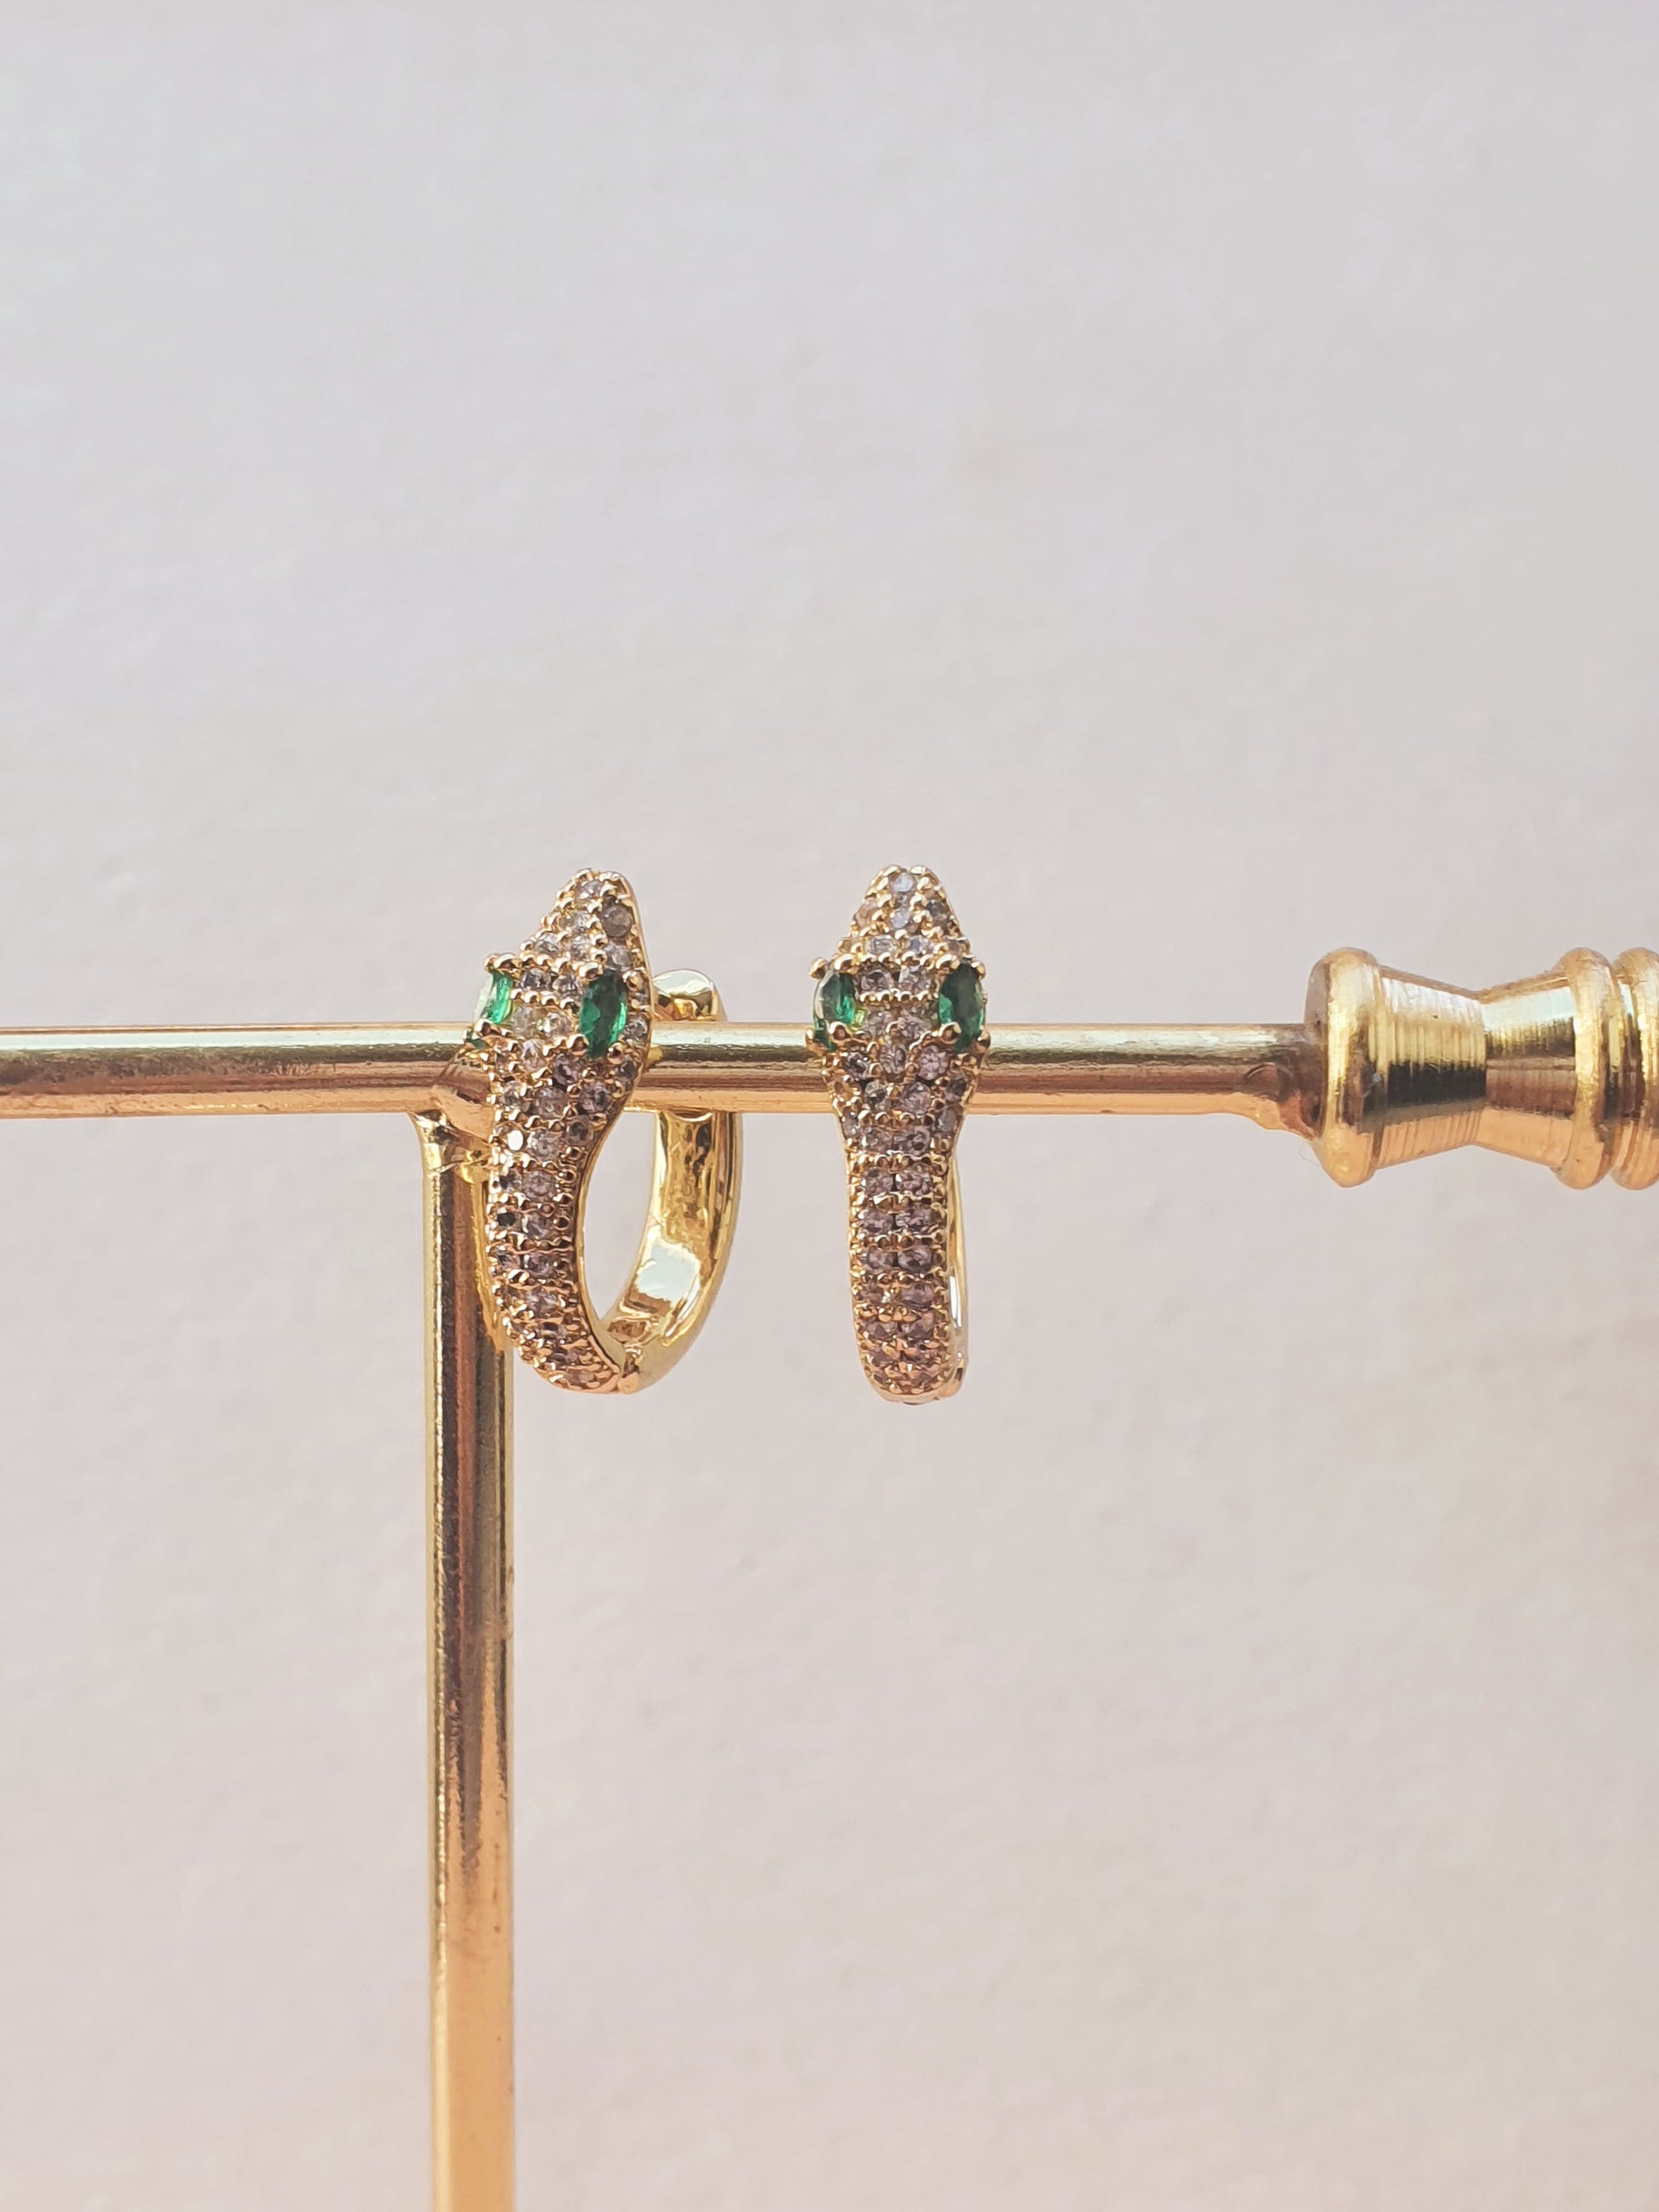 A pair of gold snake shaped huggies set with clear stones and green gems for eyes